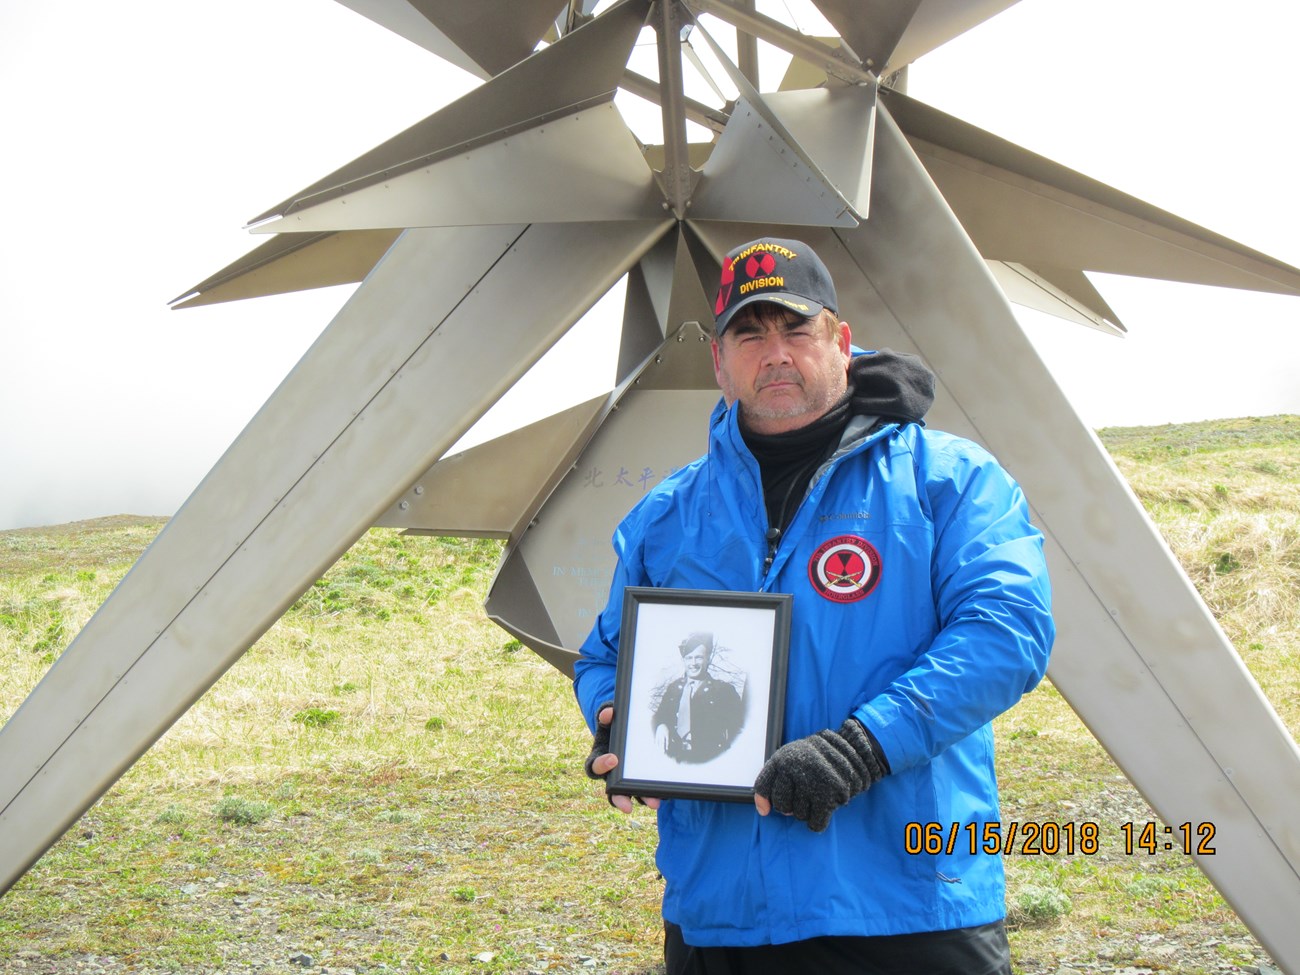 Man in blue raincoat holding black and white portrait of man in uniform, in front of large metal sculpture on top of a hill.